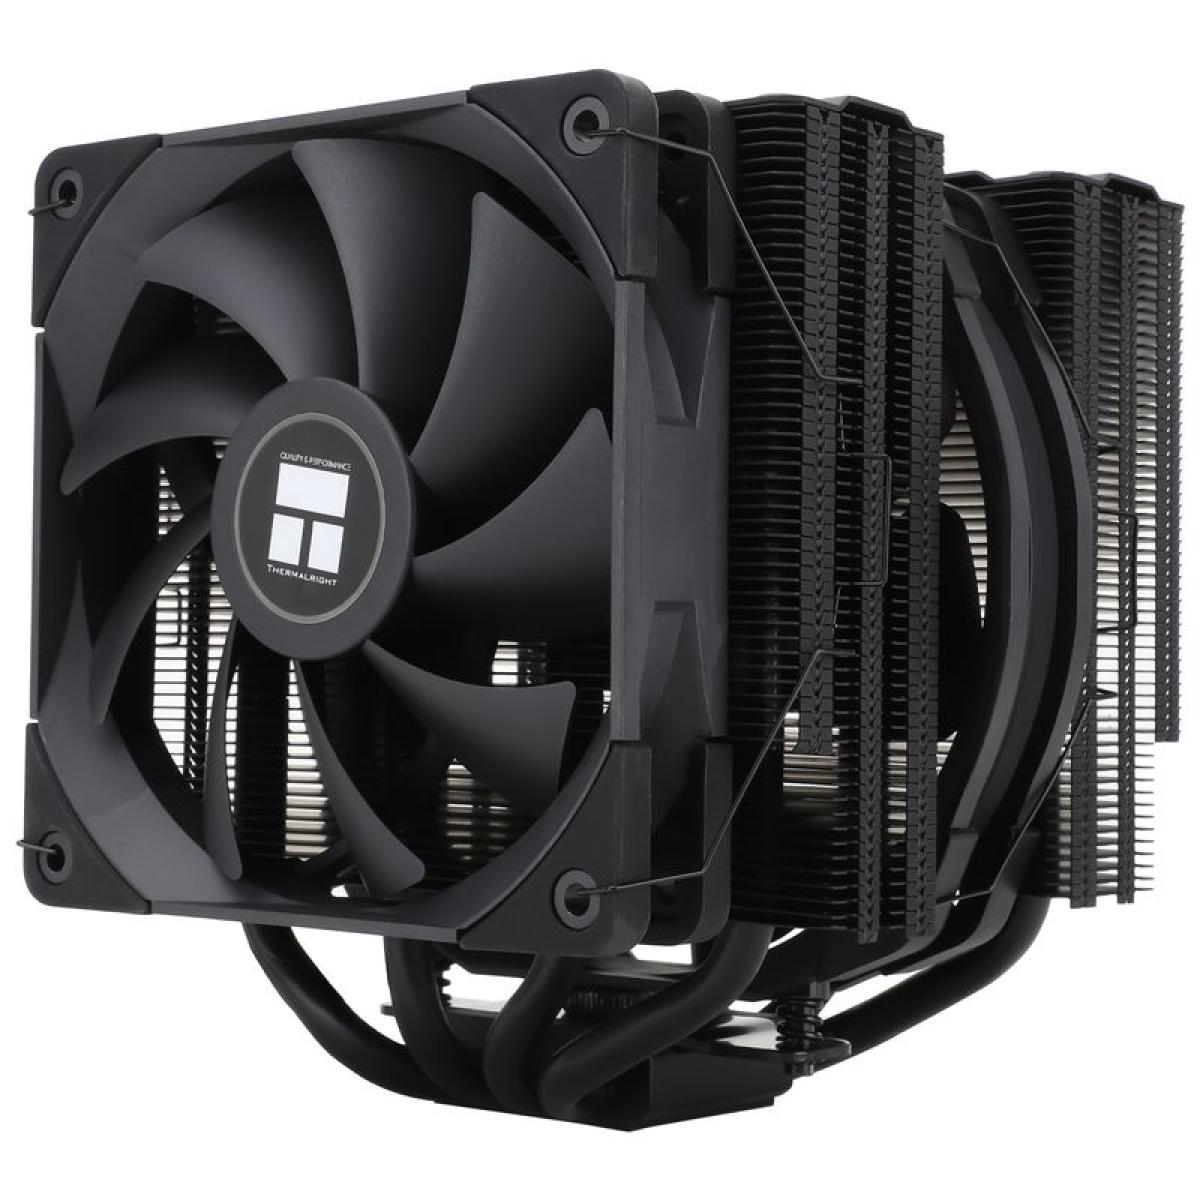 Thermalright Frost Spirit 140 BLACK V3 Dual Tower CPU Air Cooler